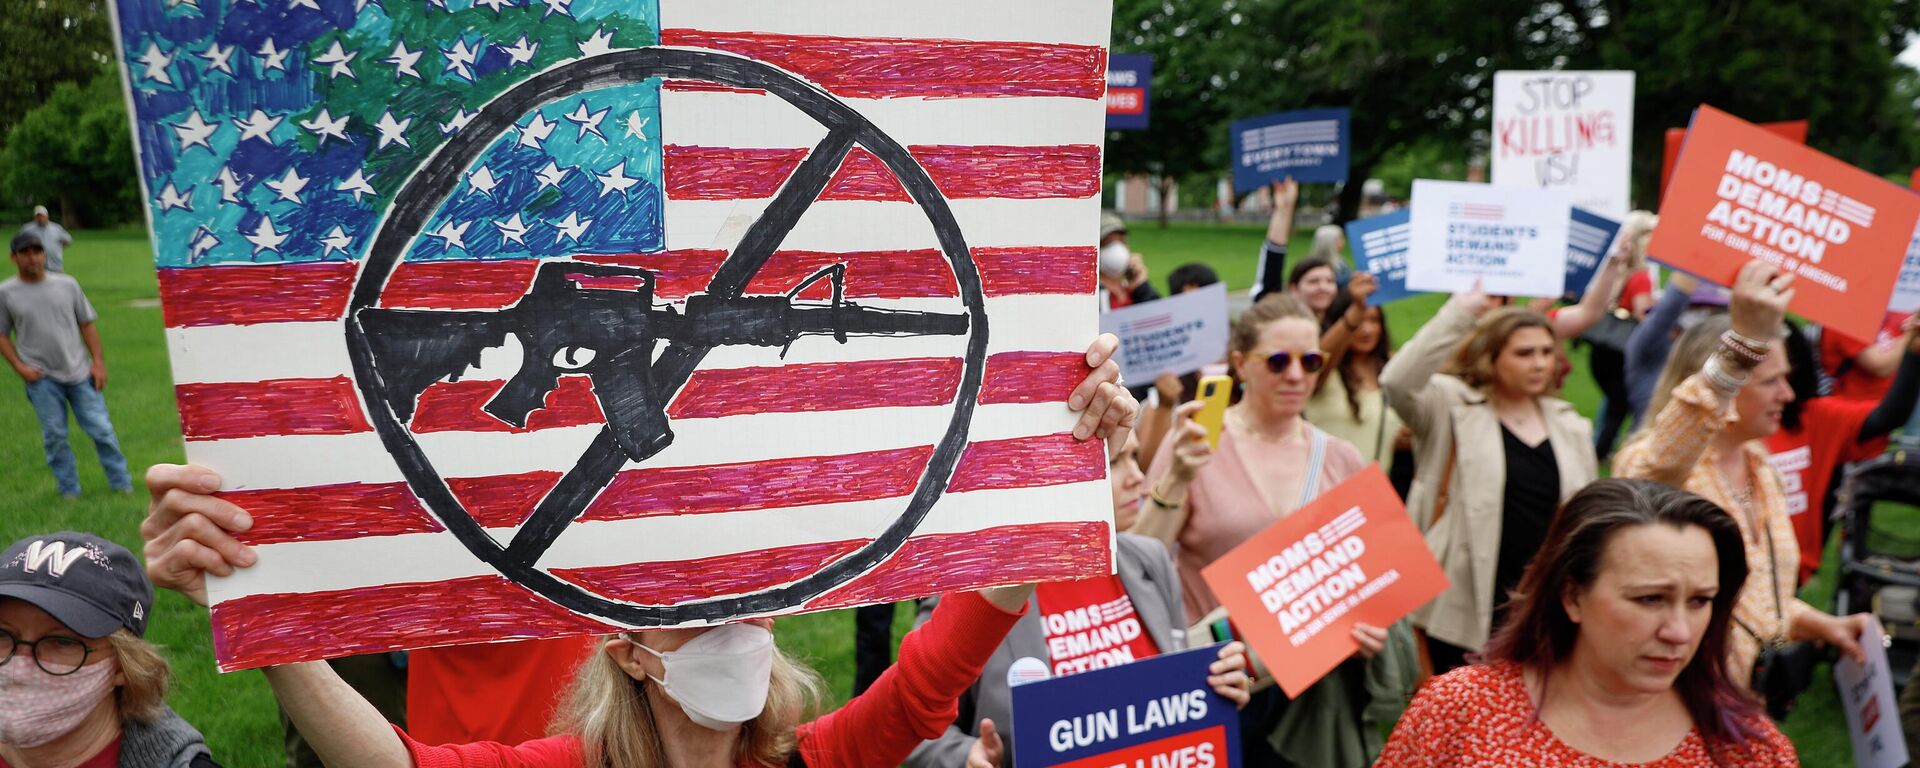 Gun control advocacy groups rally with Democratic members of Congress outside the U.S. Capitol on May 26, 2022 in Washington, DC. - Sputnik International, 1920, 29.05.2022